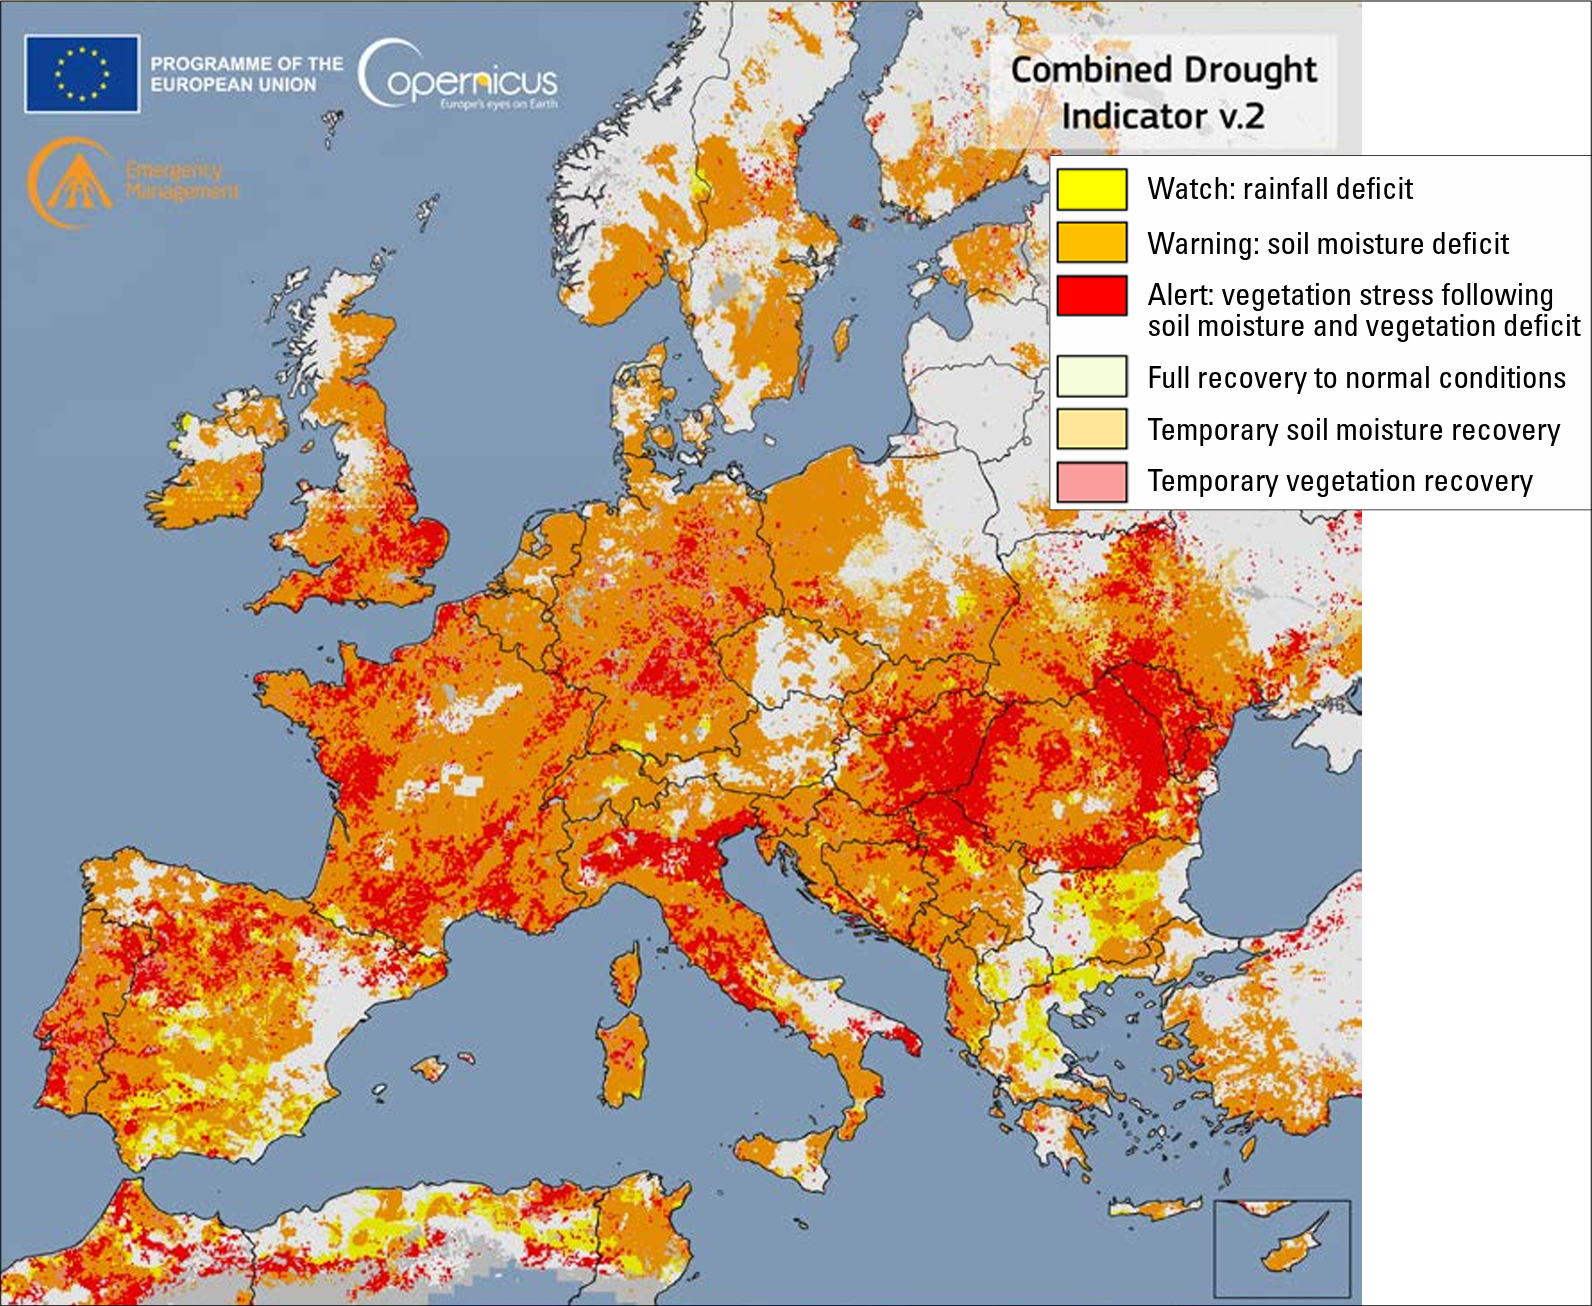 Map showing the Copernicus Emergency Management Service Combined Drought Indicator for 1-10 August 2022. Yellow areas are under a “watch” state indicating a rainfall deficit, orange areas are under a “warning” state indicating a soil moisture deficit and red areas are under an “alert” state indicating vegetation stress following soil moisture and rainfall deficits. Source: https://edo.jrc.ec.europa.eu/documents/news/GDO-EDODroughtNews202208_Europe.pdf. Graphic: Copernicus Emergency Management Service